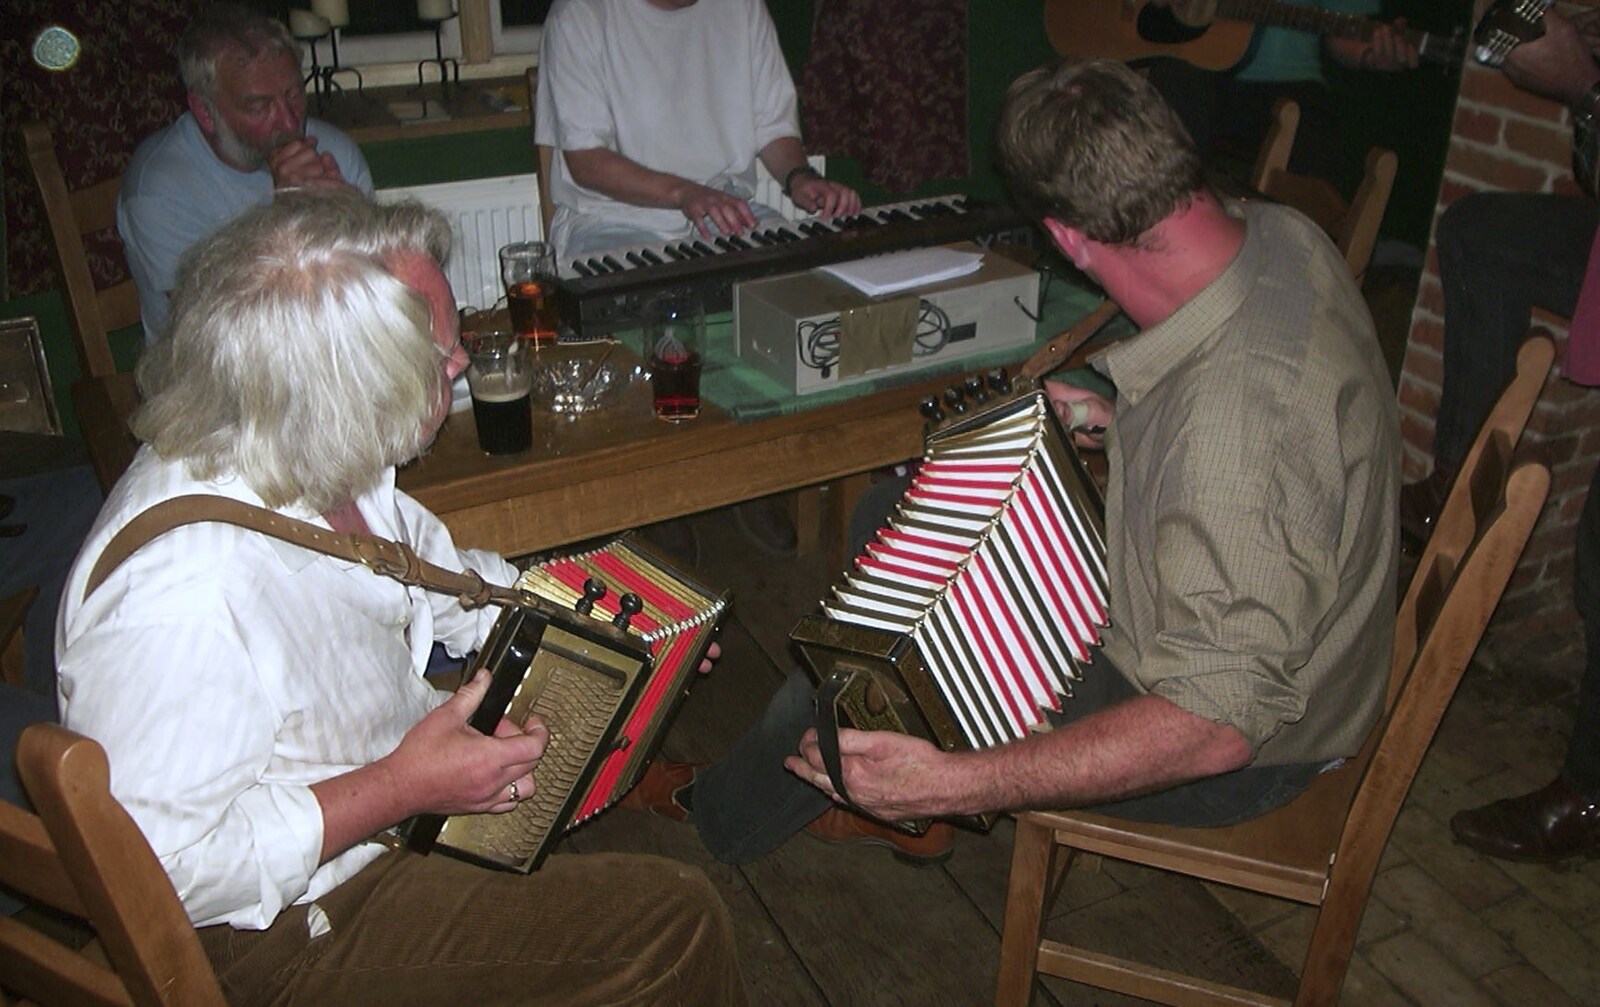 Double accordions in action from The BSCC at Laxfield and Hoxne, Suffolk - 2nd May 2002